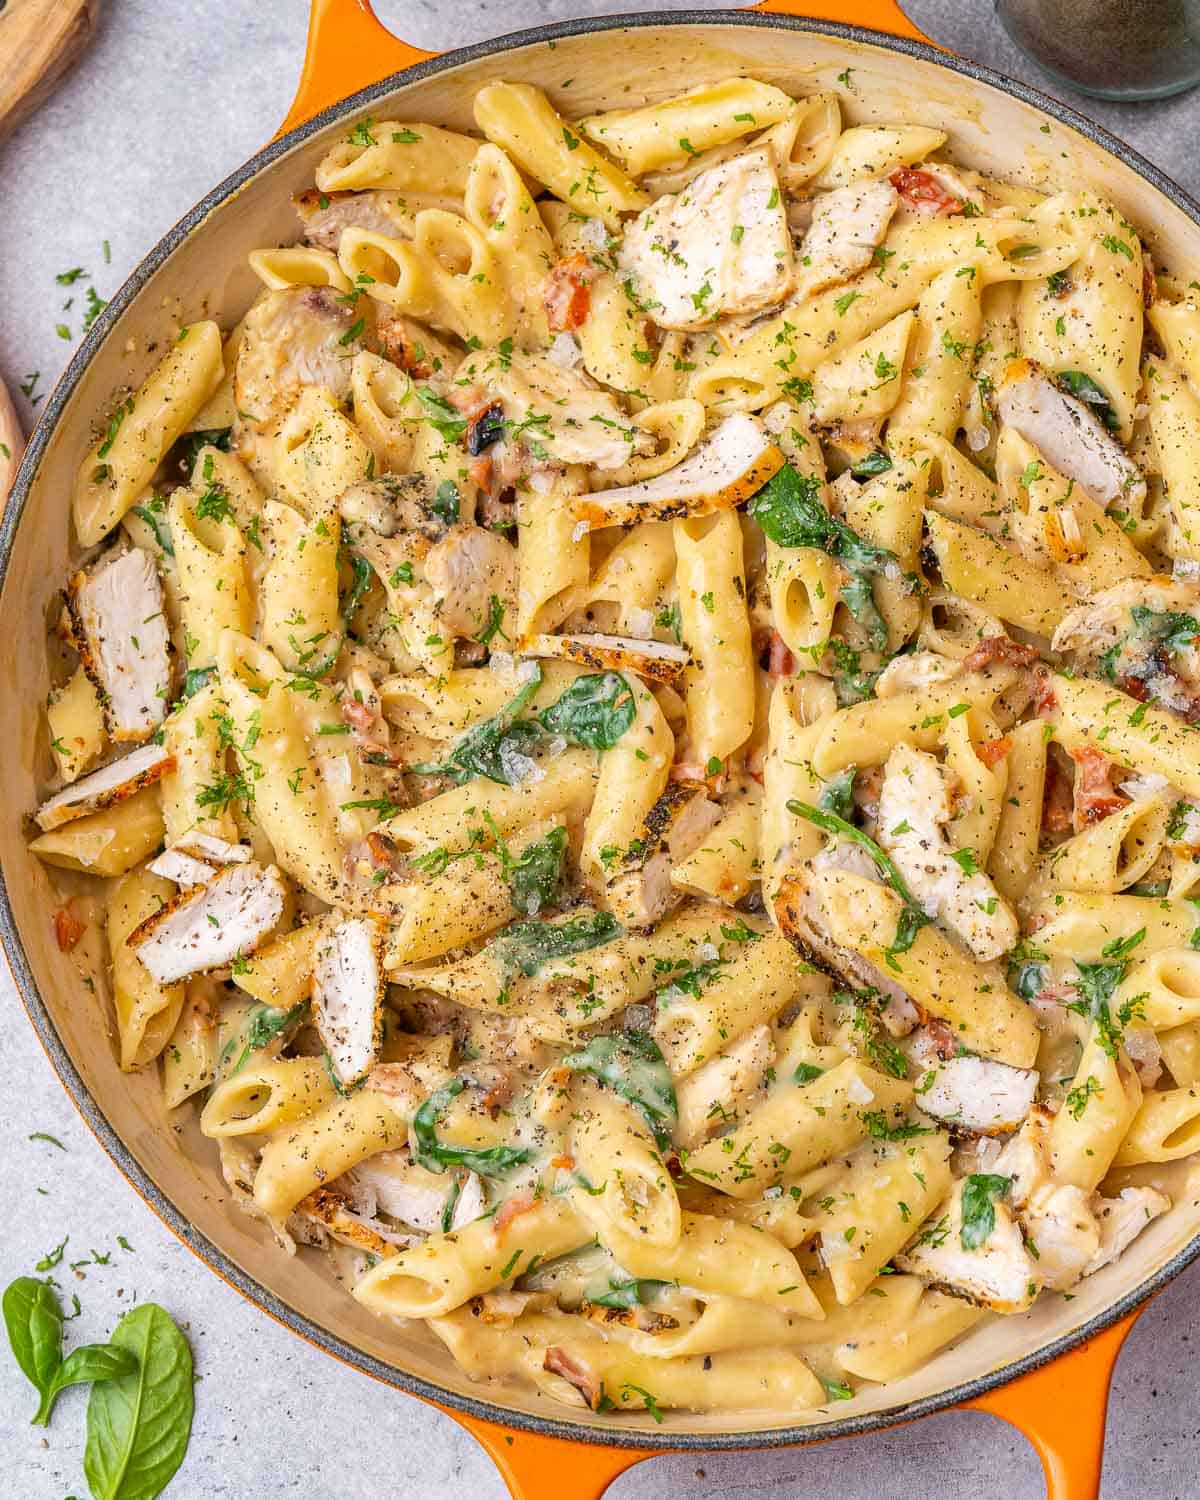 Rave Essentials: How to Make Spinach and Grilled Chicken Pasta - Technoedm